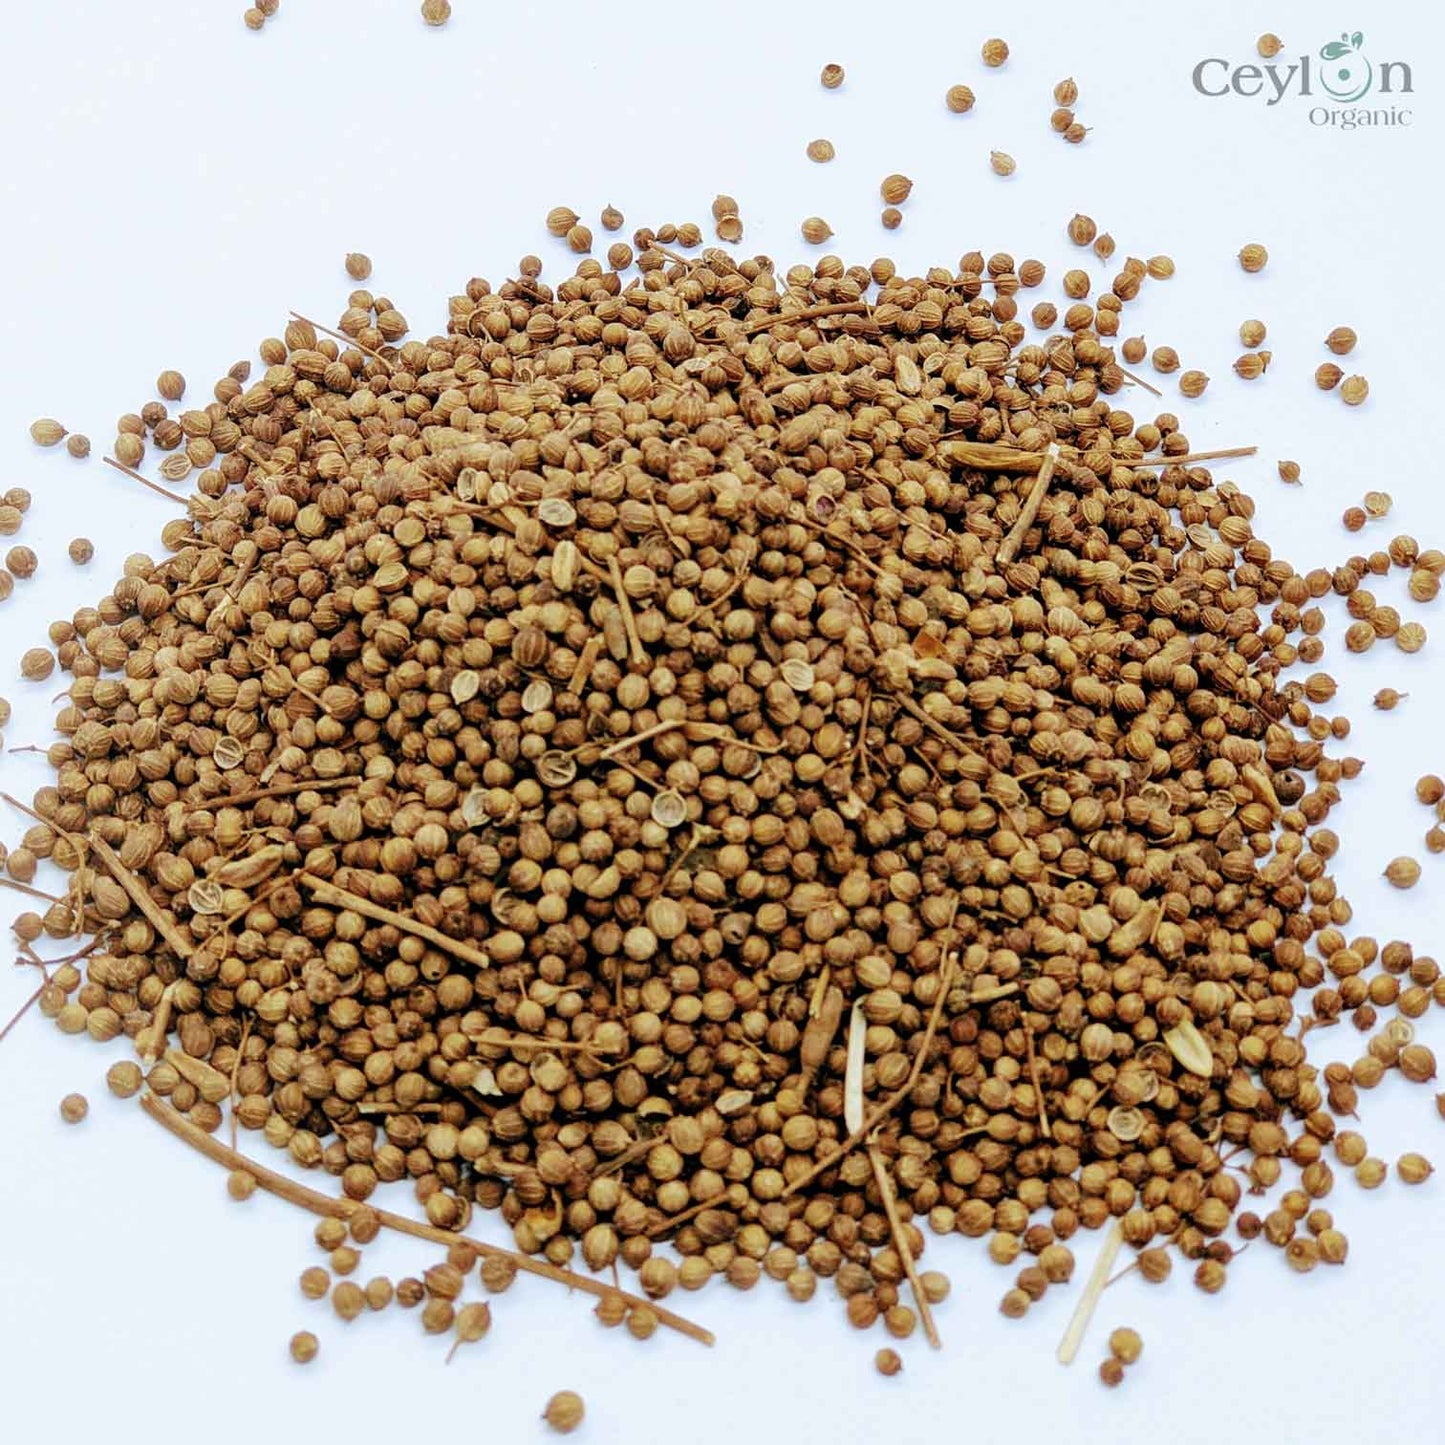 1kg+ Coriander Seeds, Cilantro, Chinese parsley, dhania, Best Quality Spices | Ceylon Organic-3